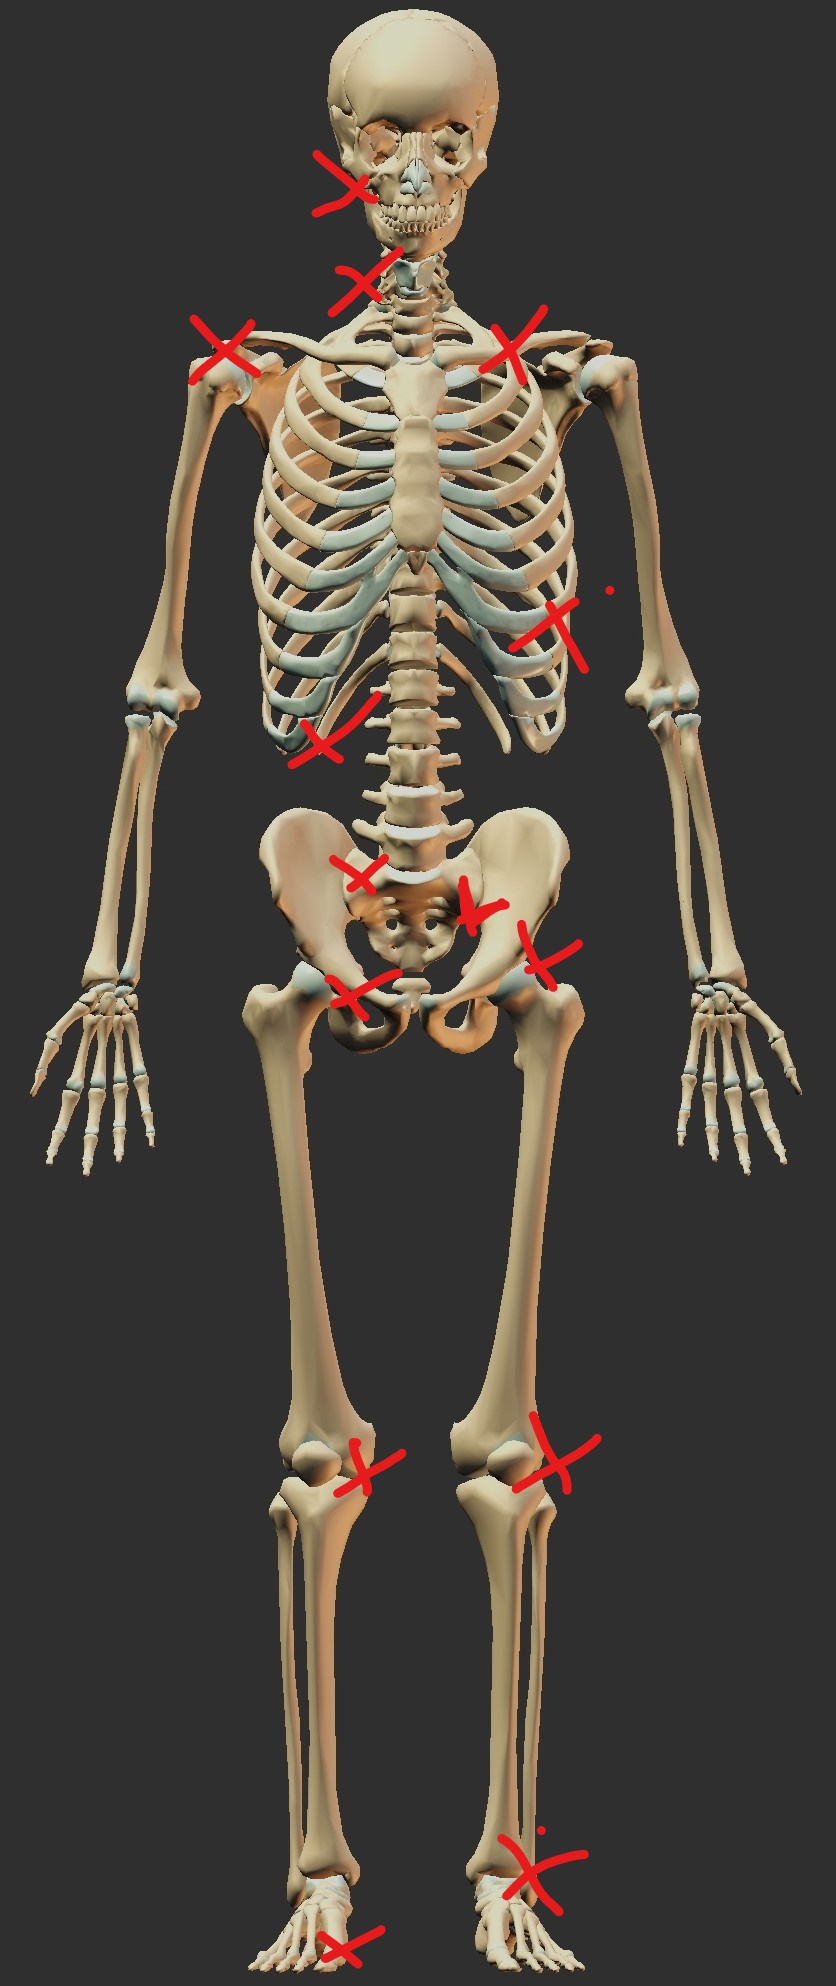 Skeleton with common sites of impingement or instability